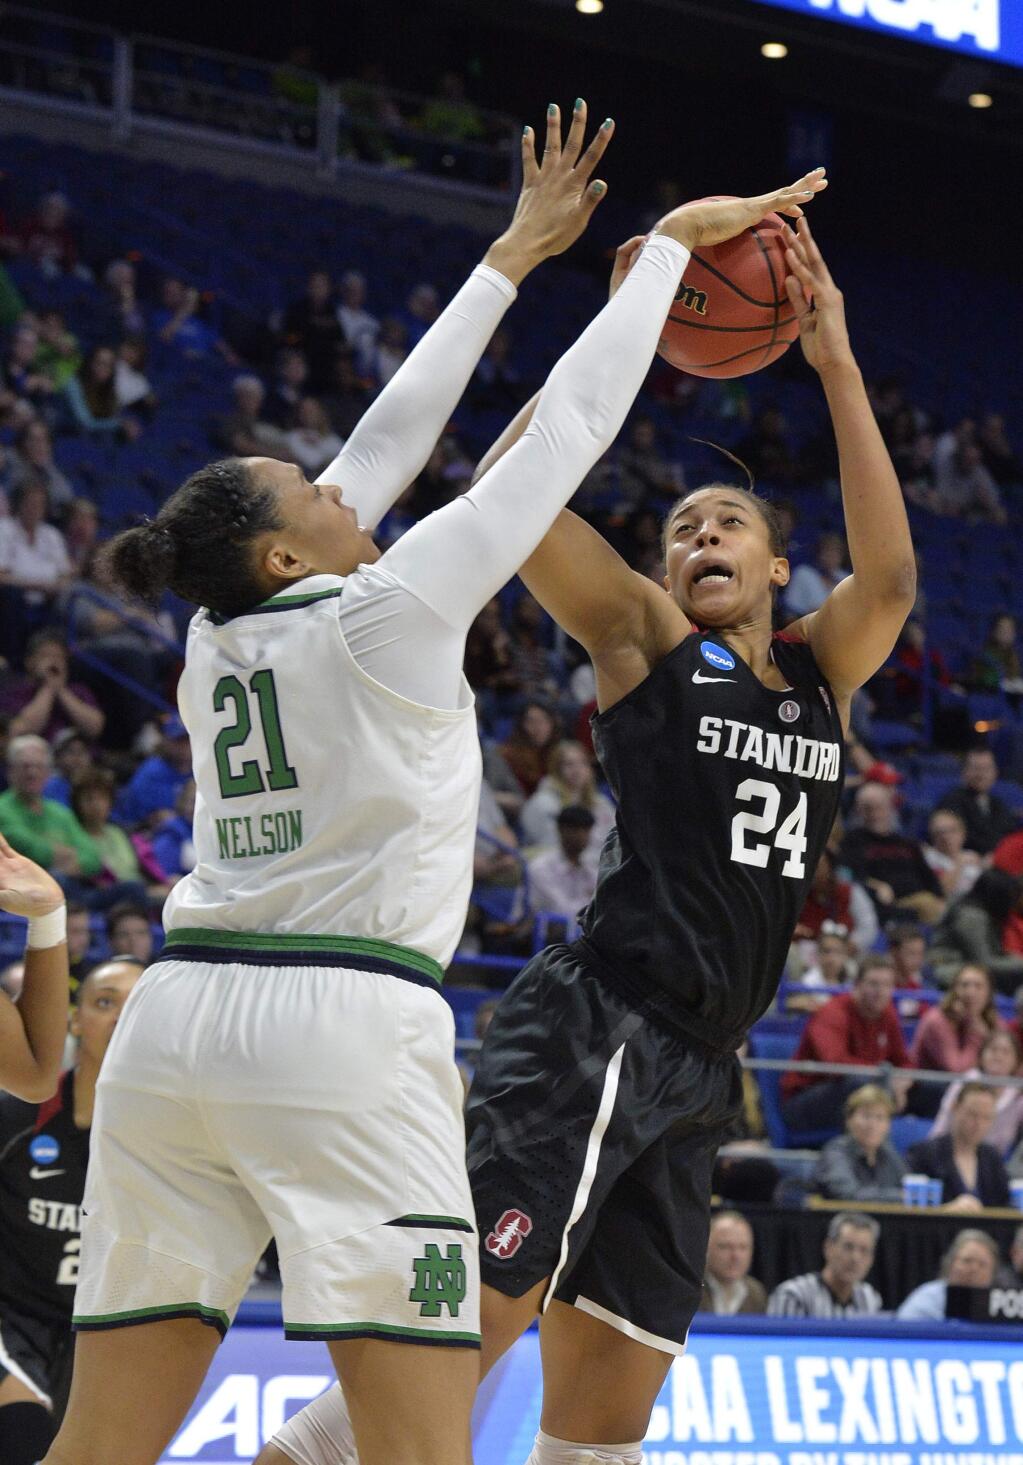 Notre Dame's Kristina Nelson (21) blocks the shot of Stanford's Erica McCall (24) during the first half of a regional final of the NCAA women's college basketball tournament, Sunday, March. 26, 2017, in Lexington, Ky. (AP Photo/Timothy D. Easley)